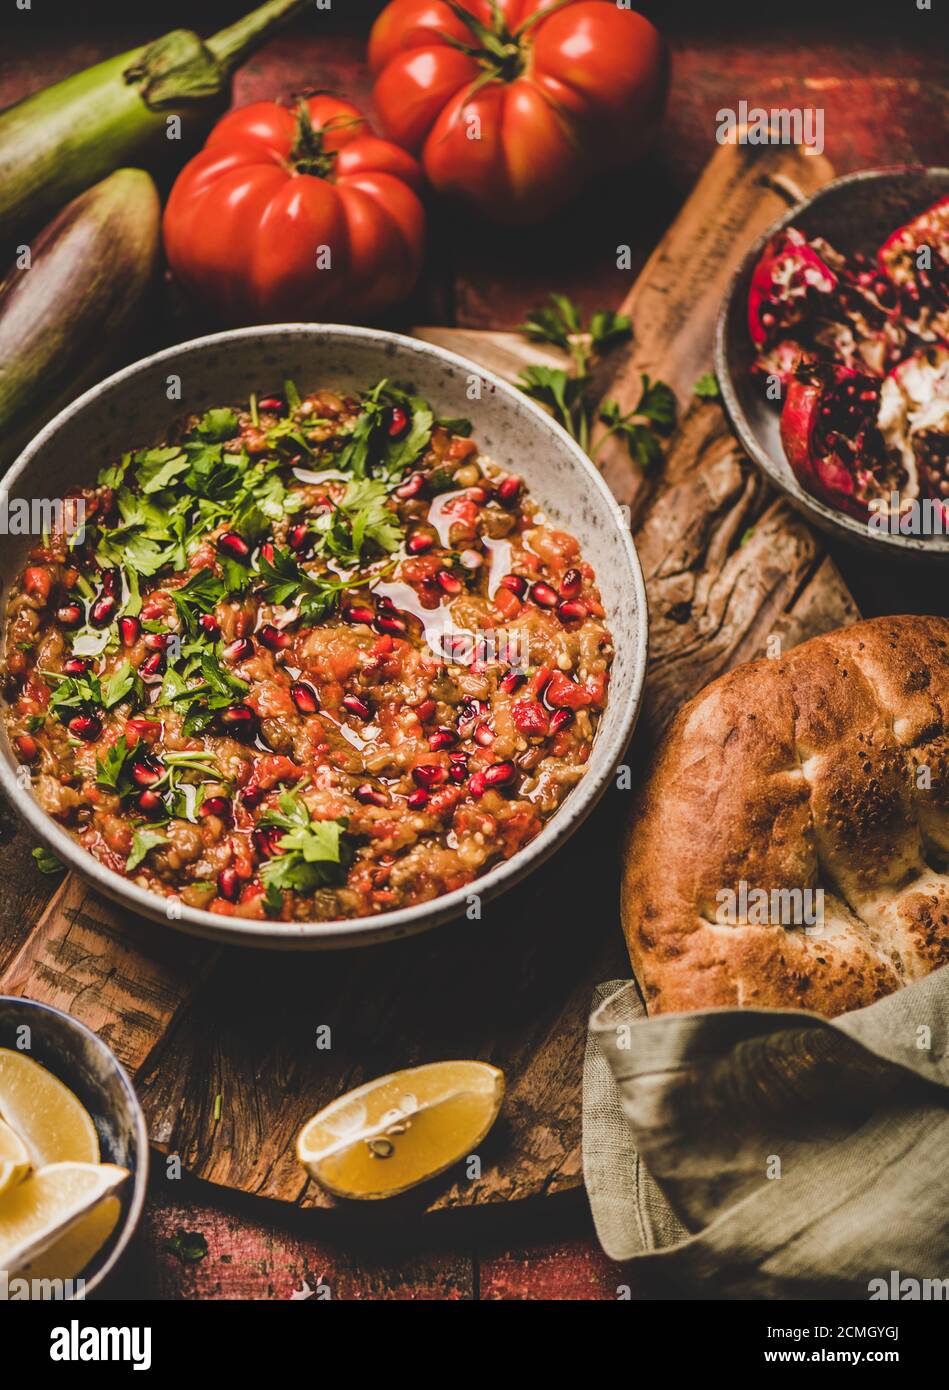 Babaganoush dip with fresh parsley, pomegranate seeds and flatbread Stock Photo